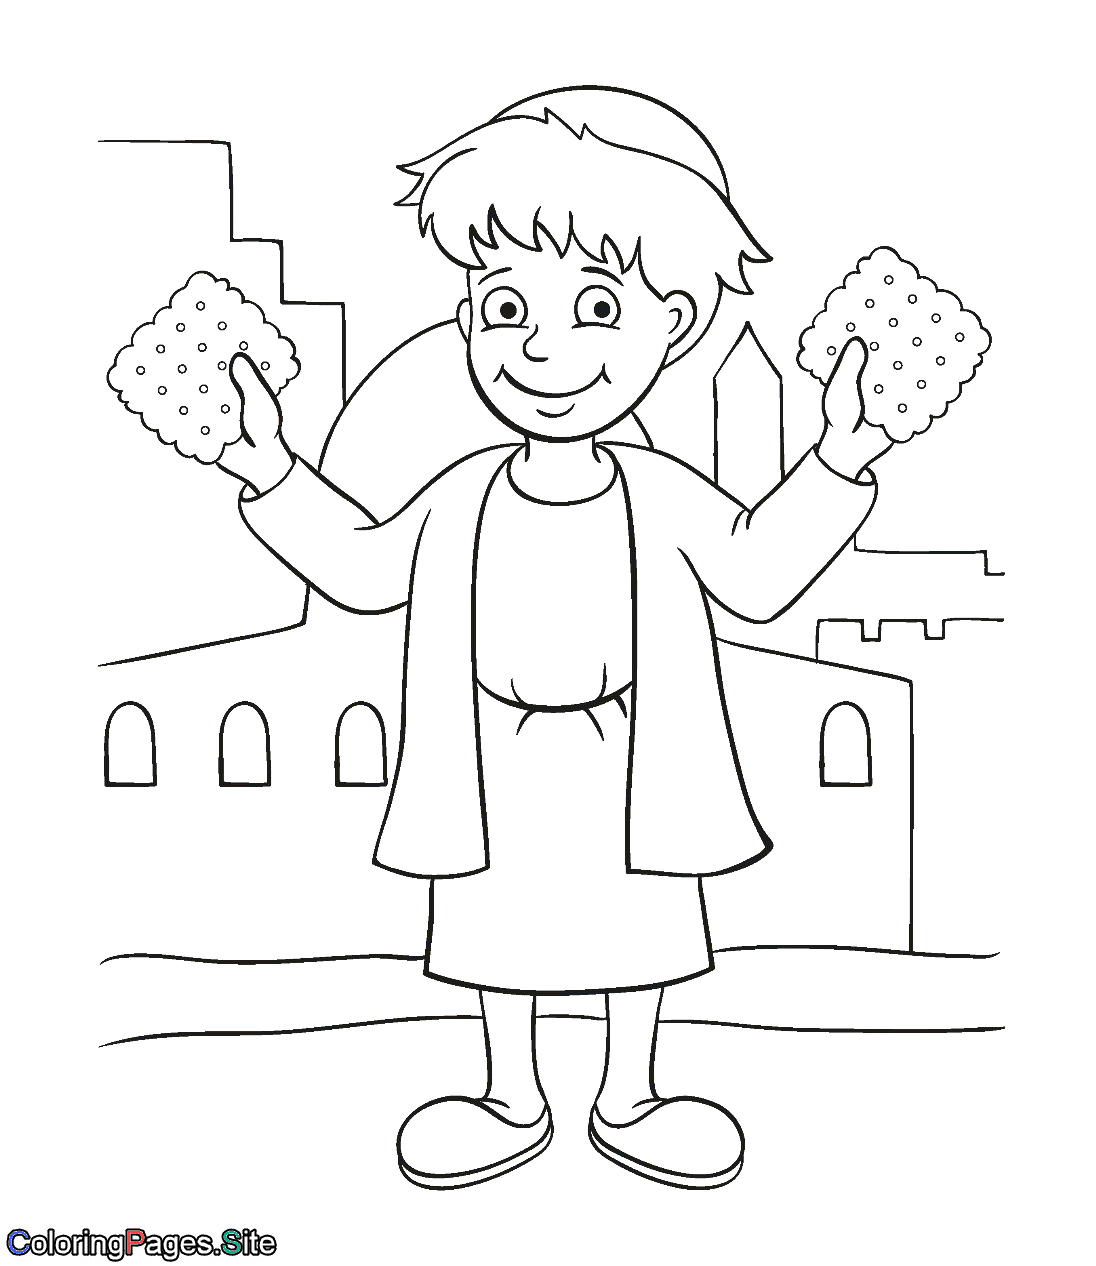 Passover online coloring